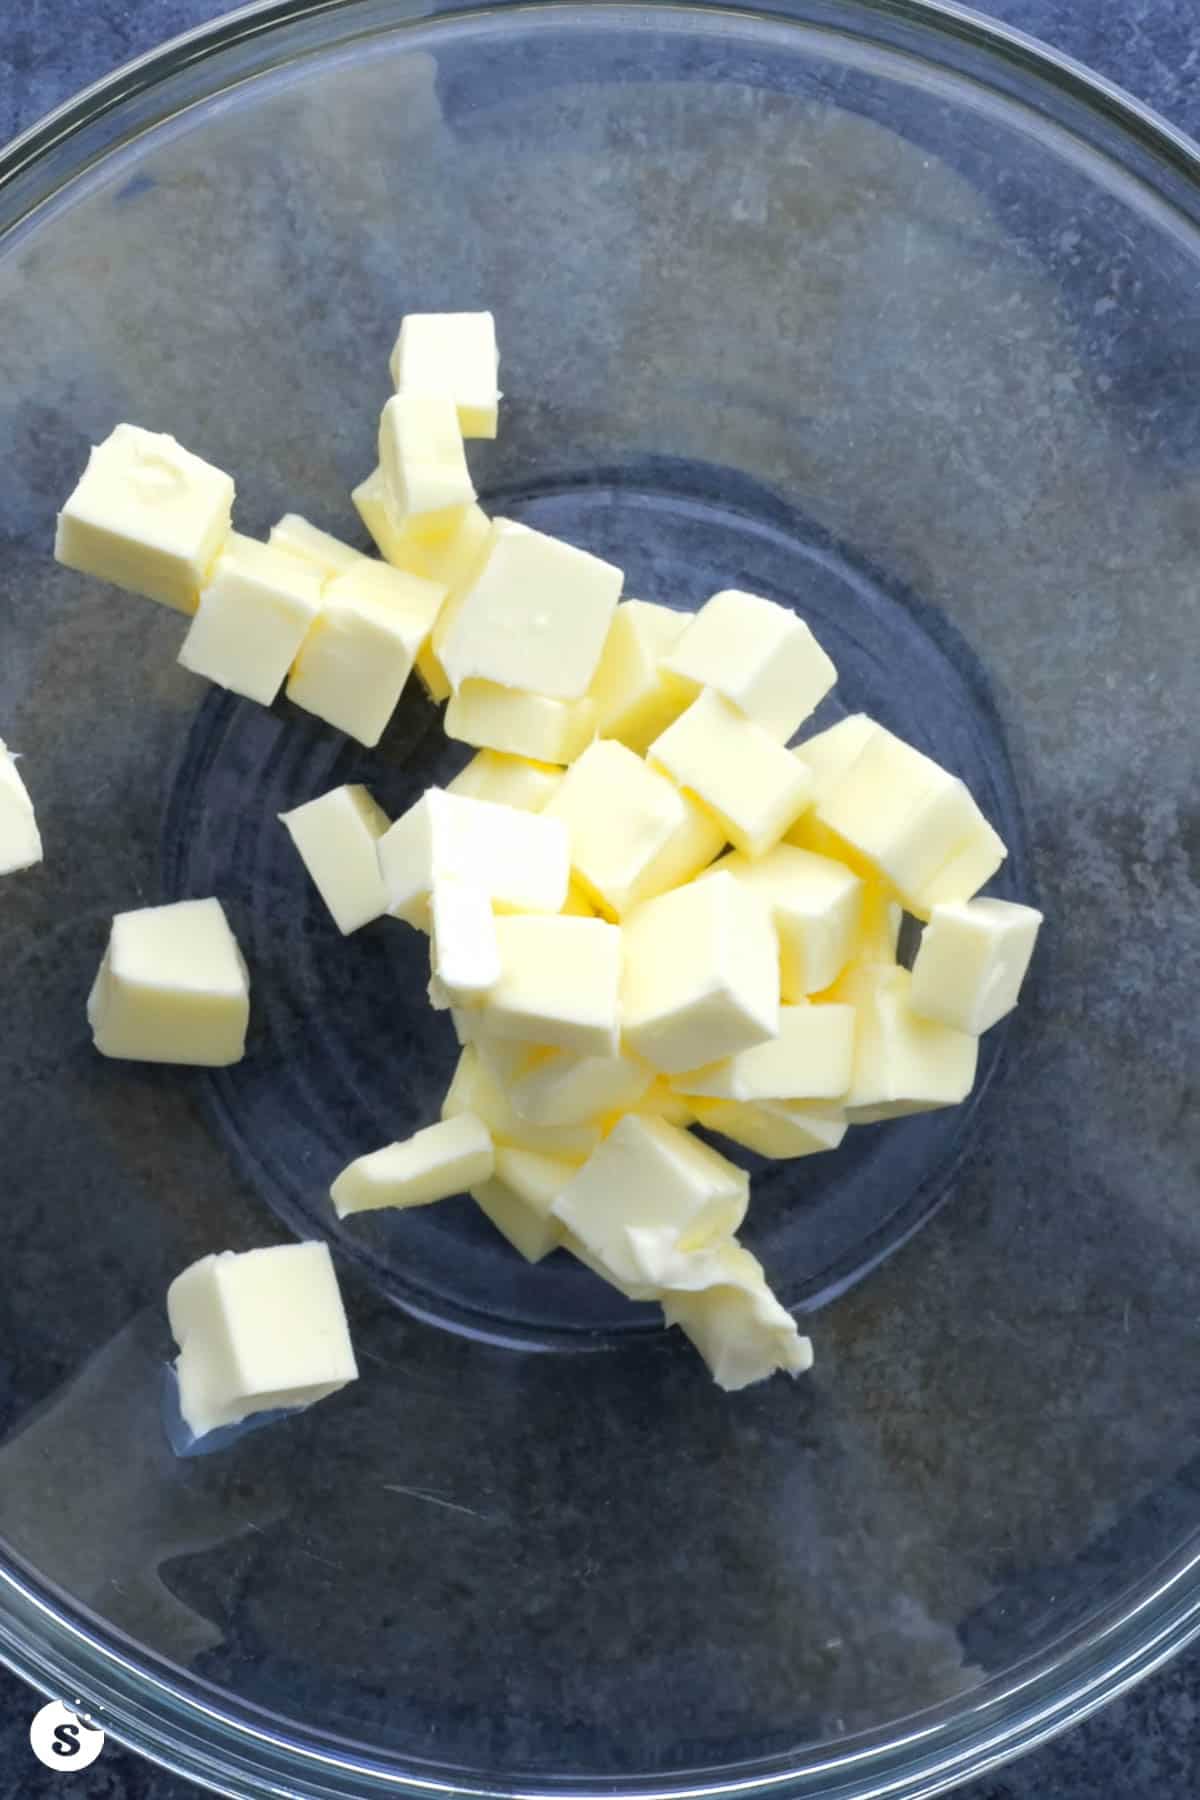 Cubed butter in a clear glass bowl